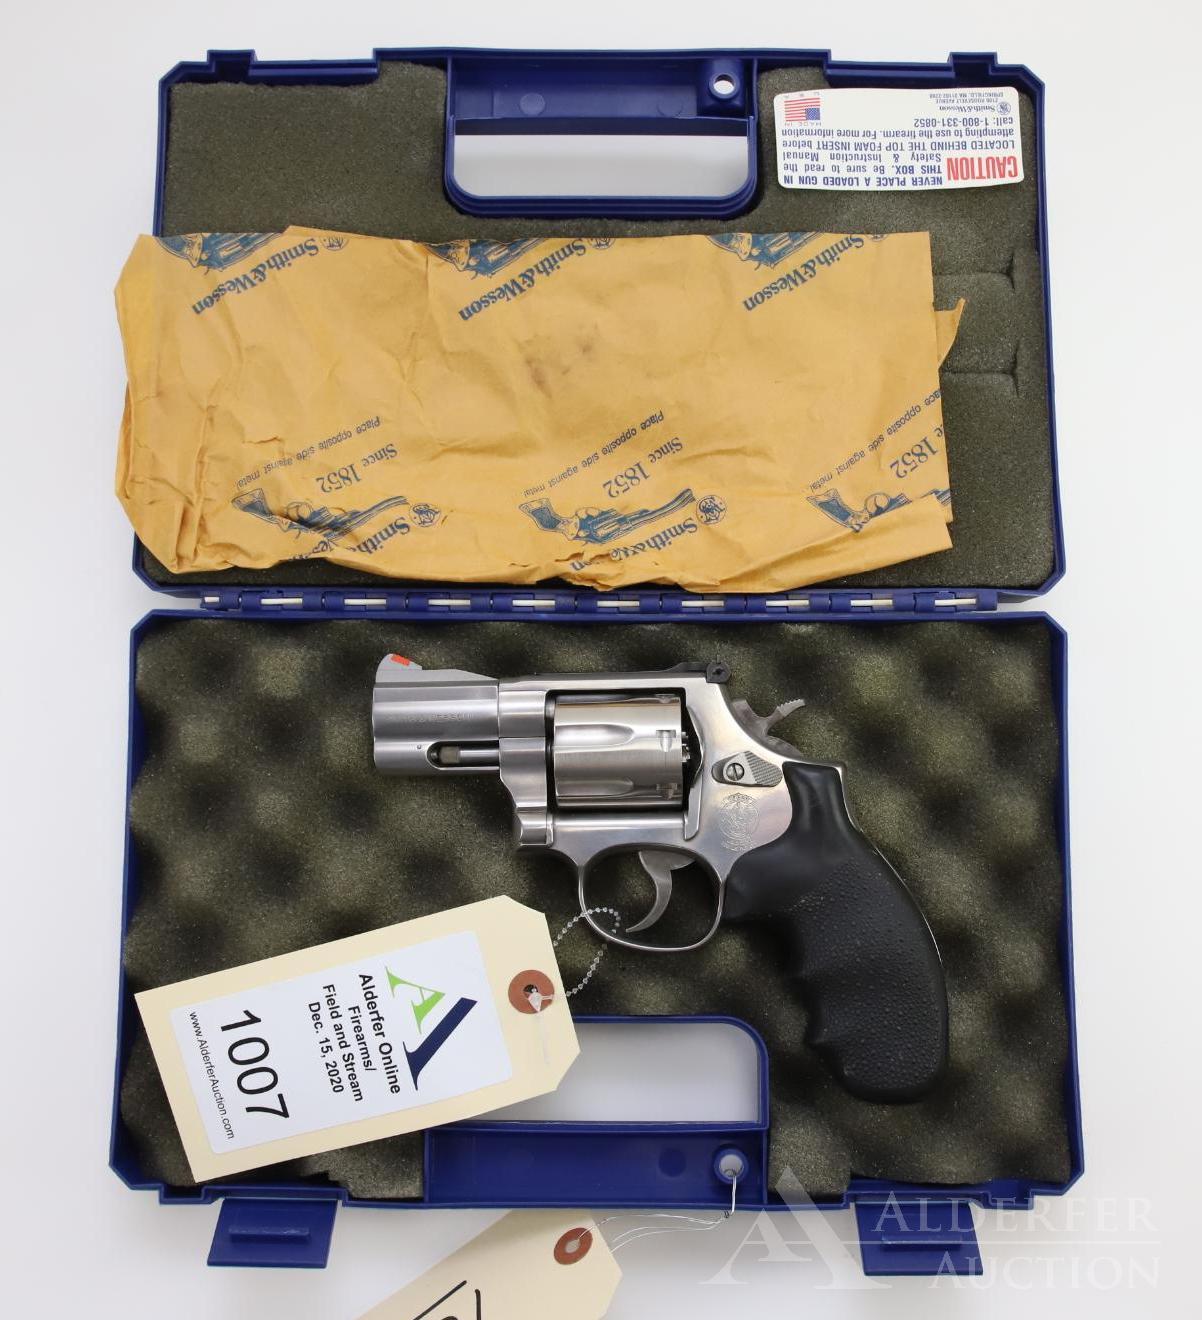 Smith & Wesson 686-5 double action revolver.